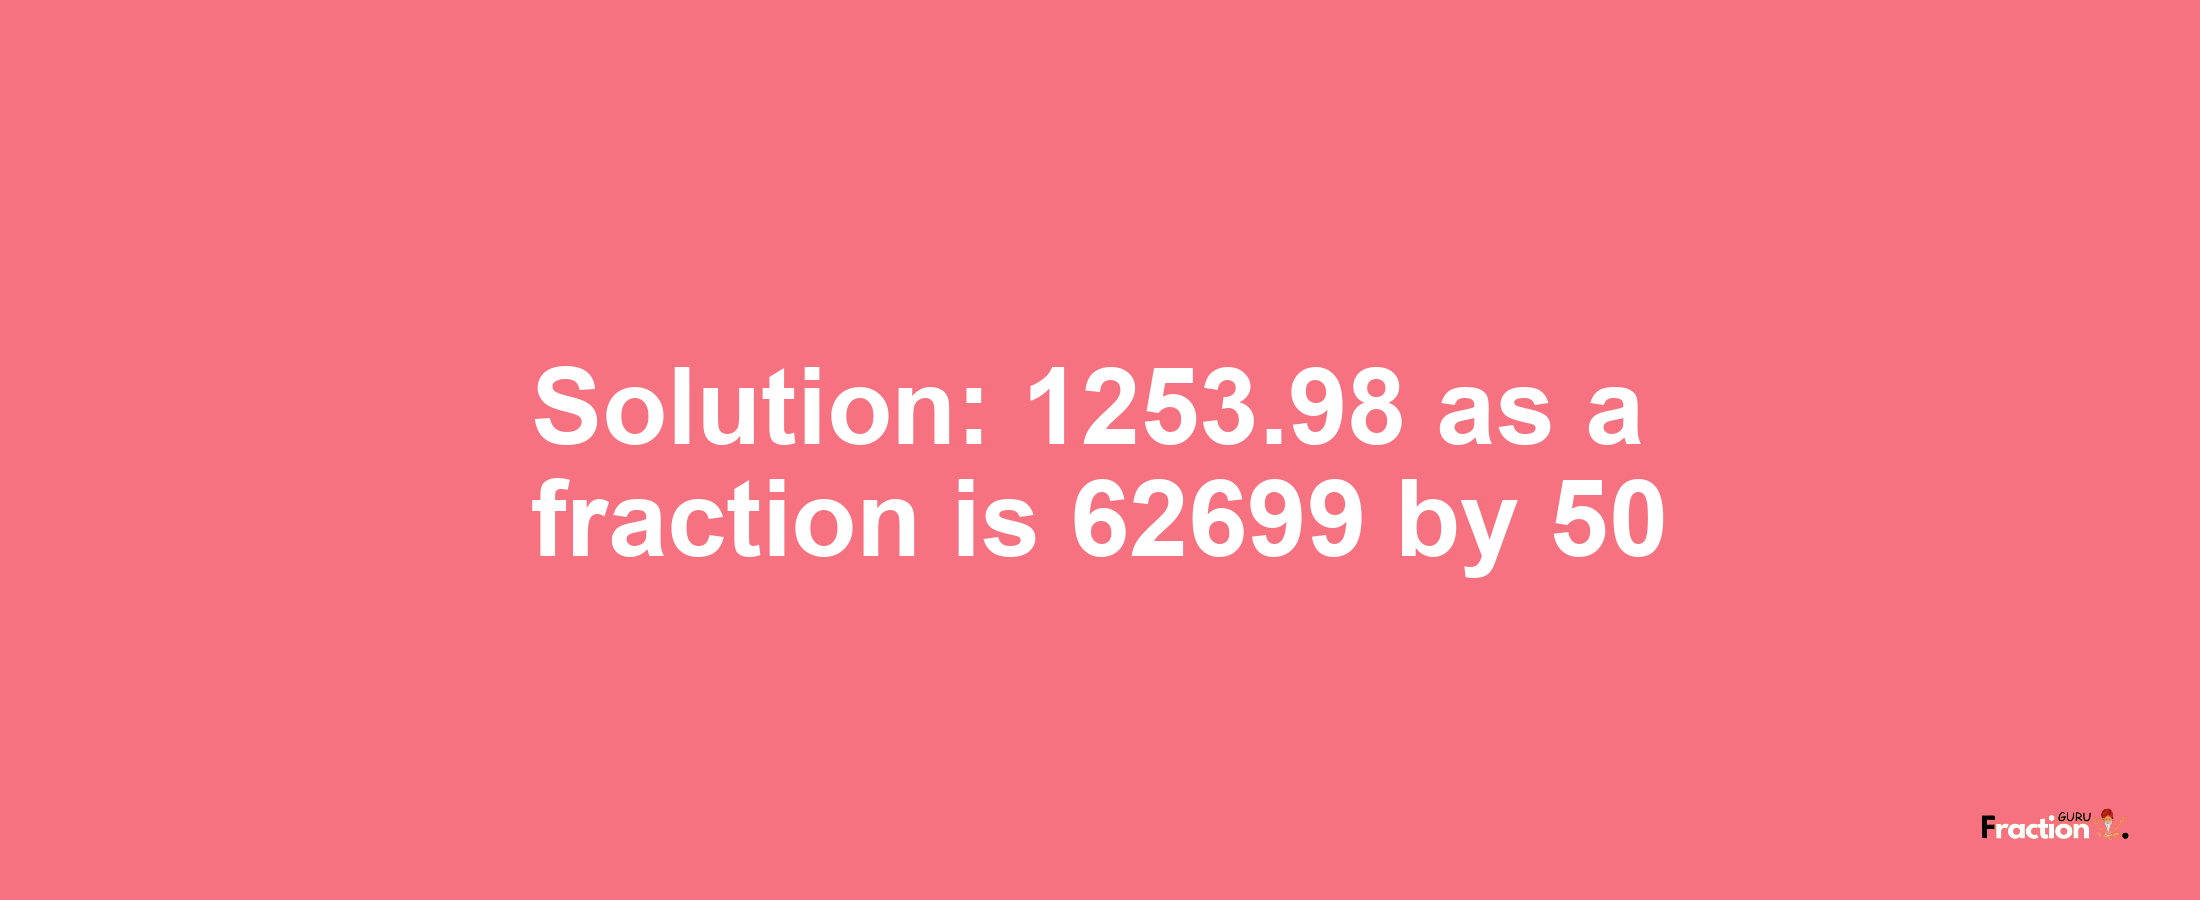 Solution:1253.98 as a fraction is 62699/50